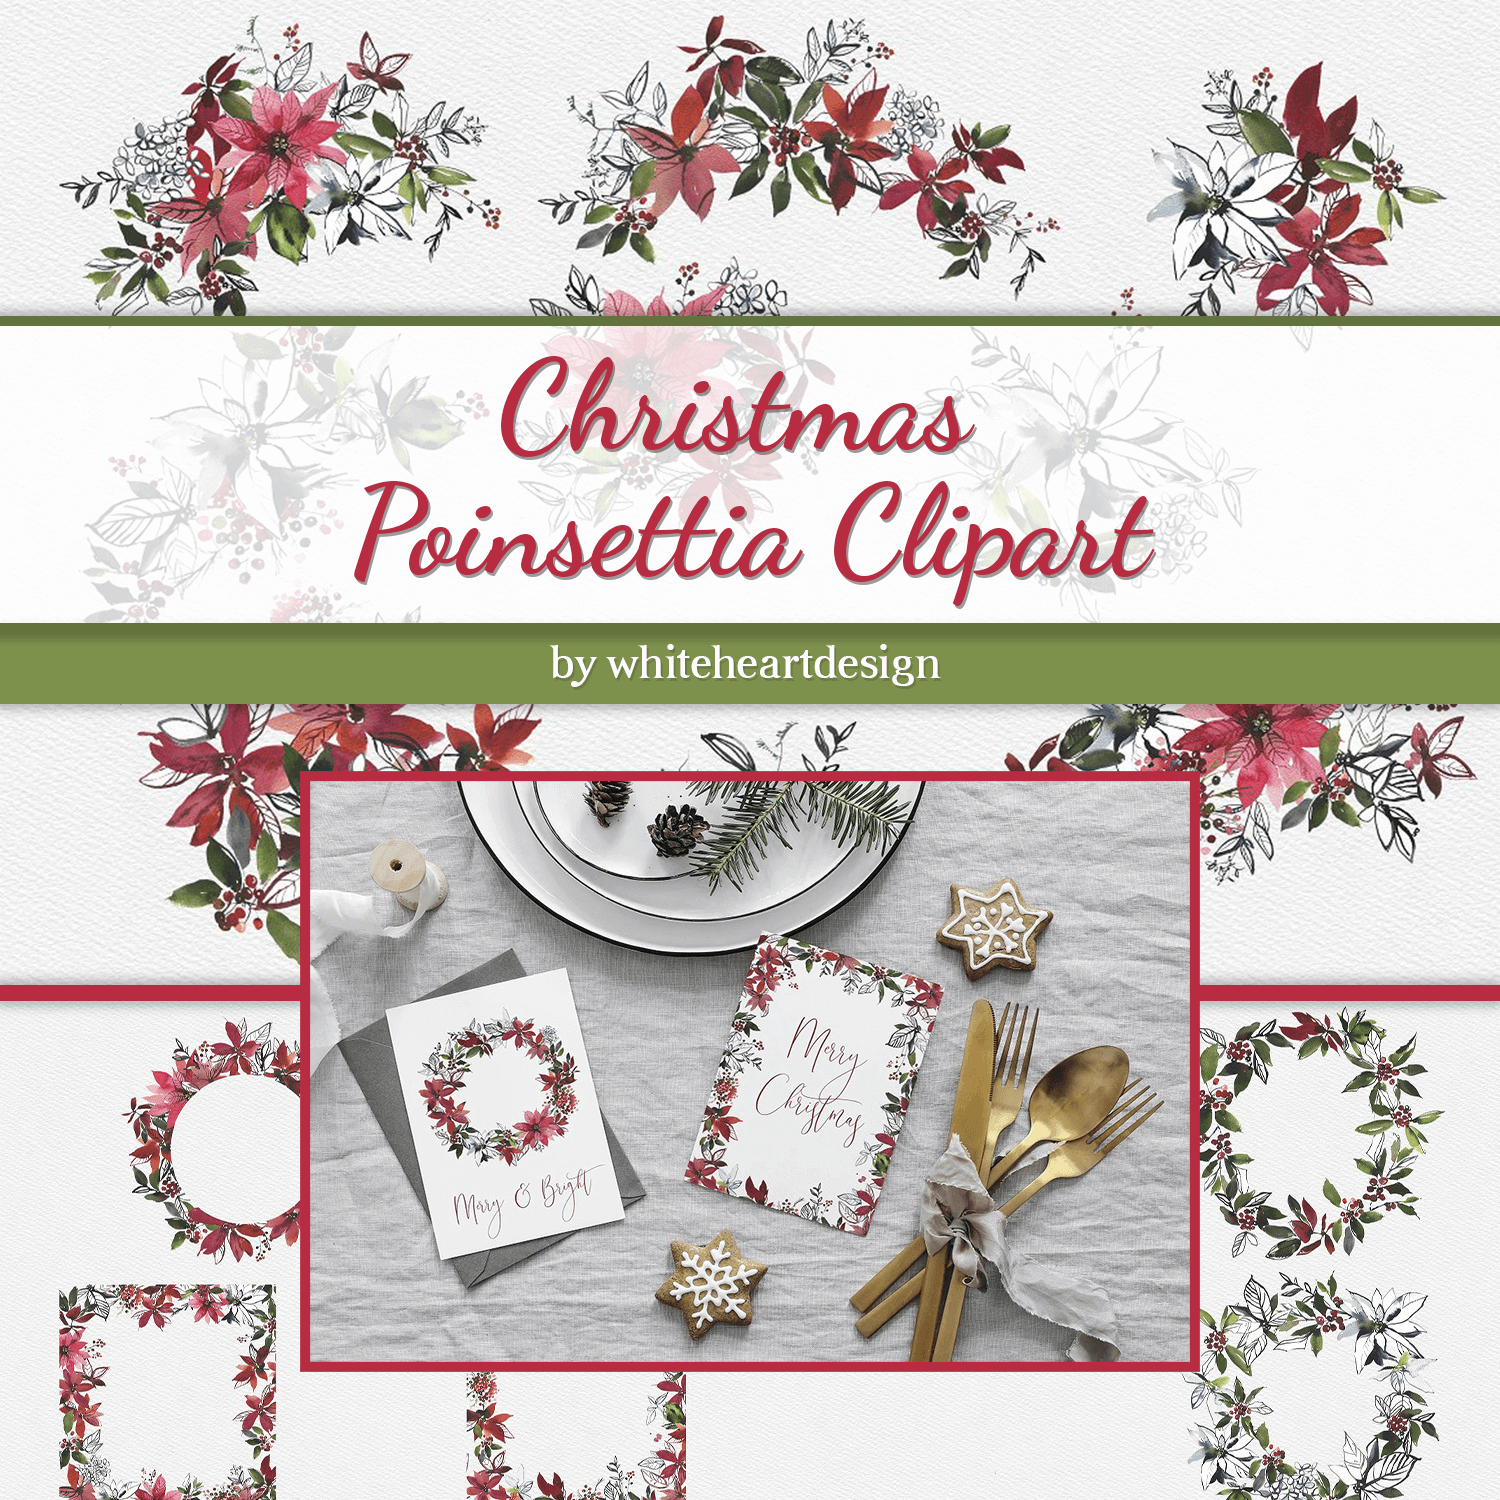 Cards decorated with Christmas Poinsettia Clipart.